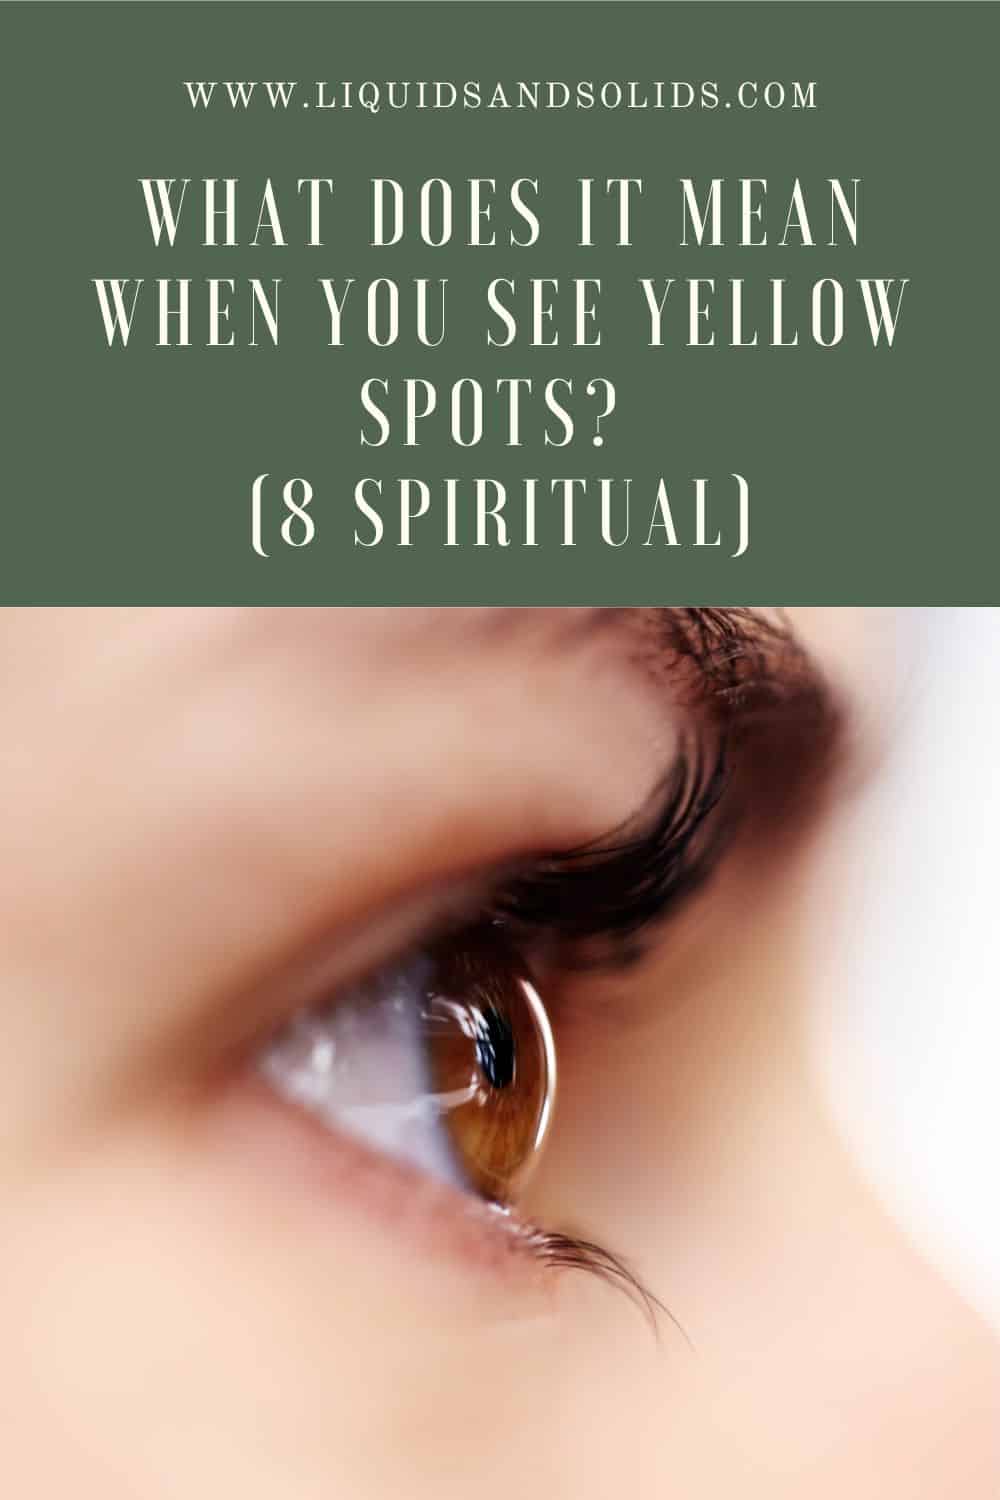 8 Meanings to Seeing Yellow Spots